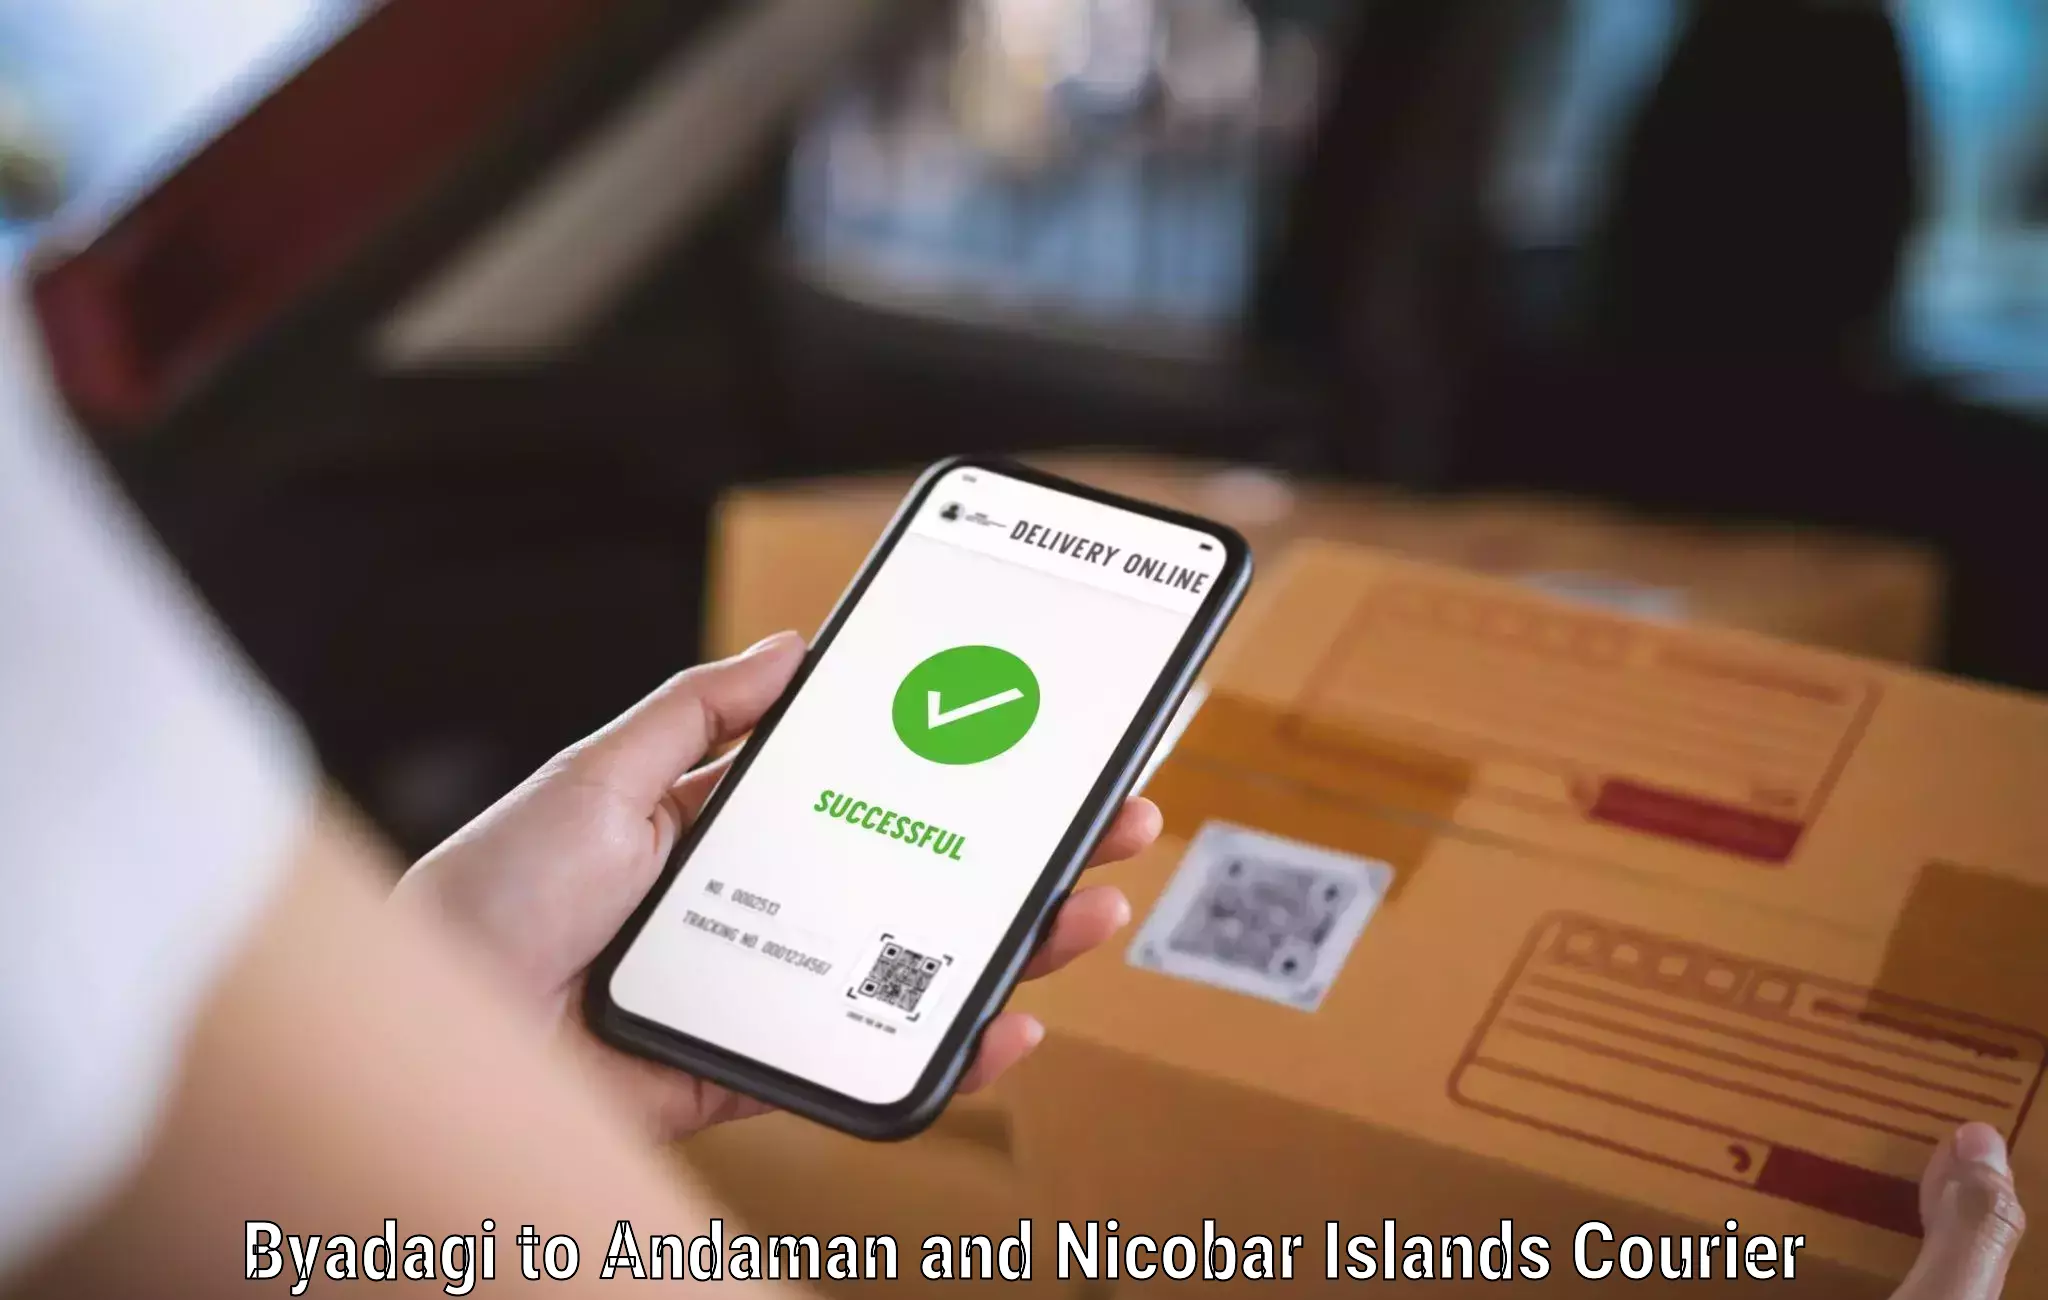 Courier service booking Byadagi to South Andaman